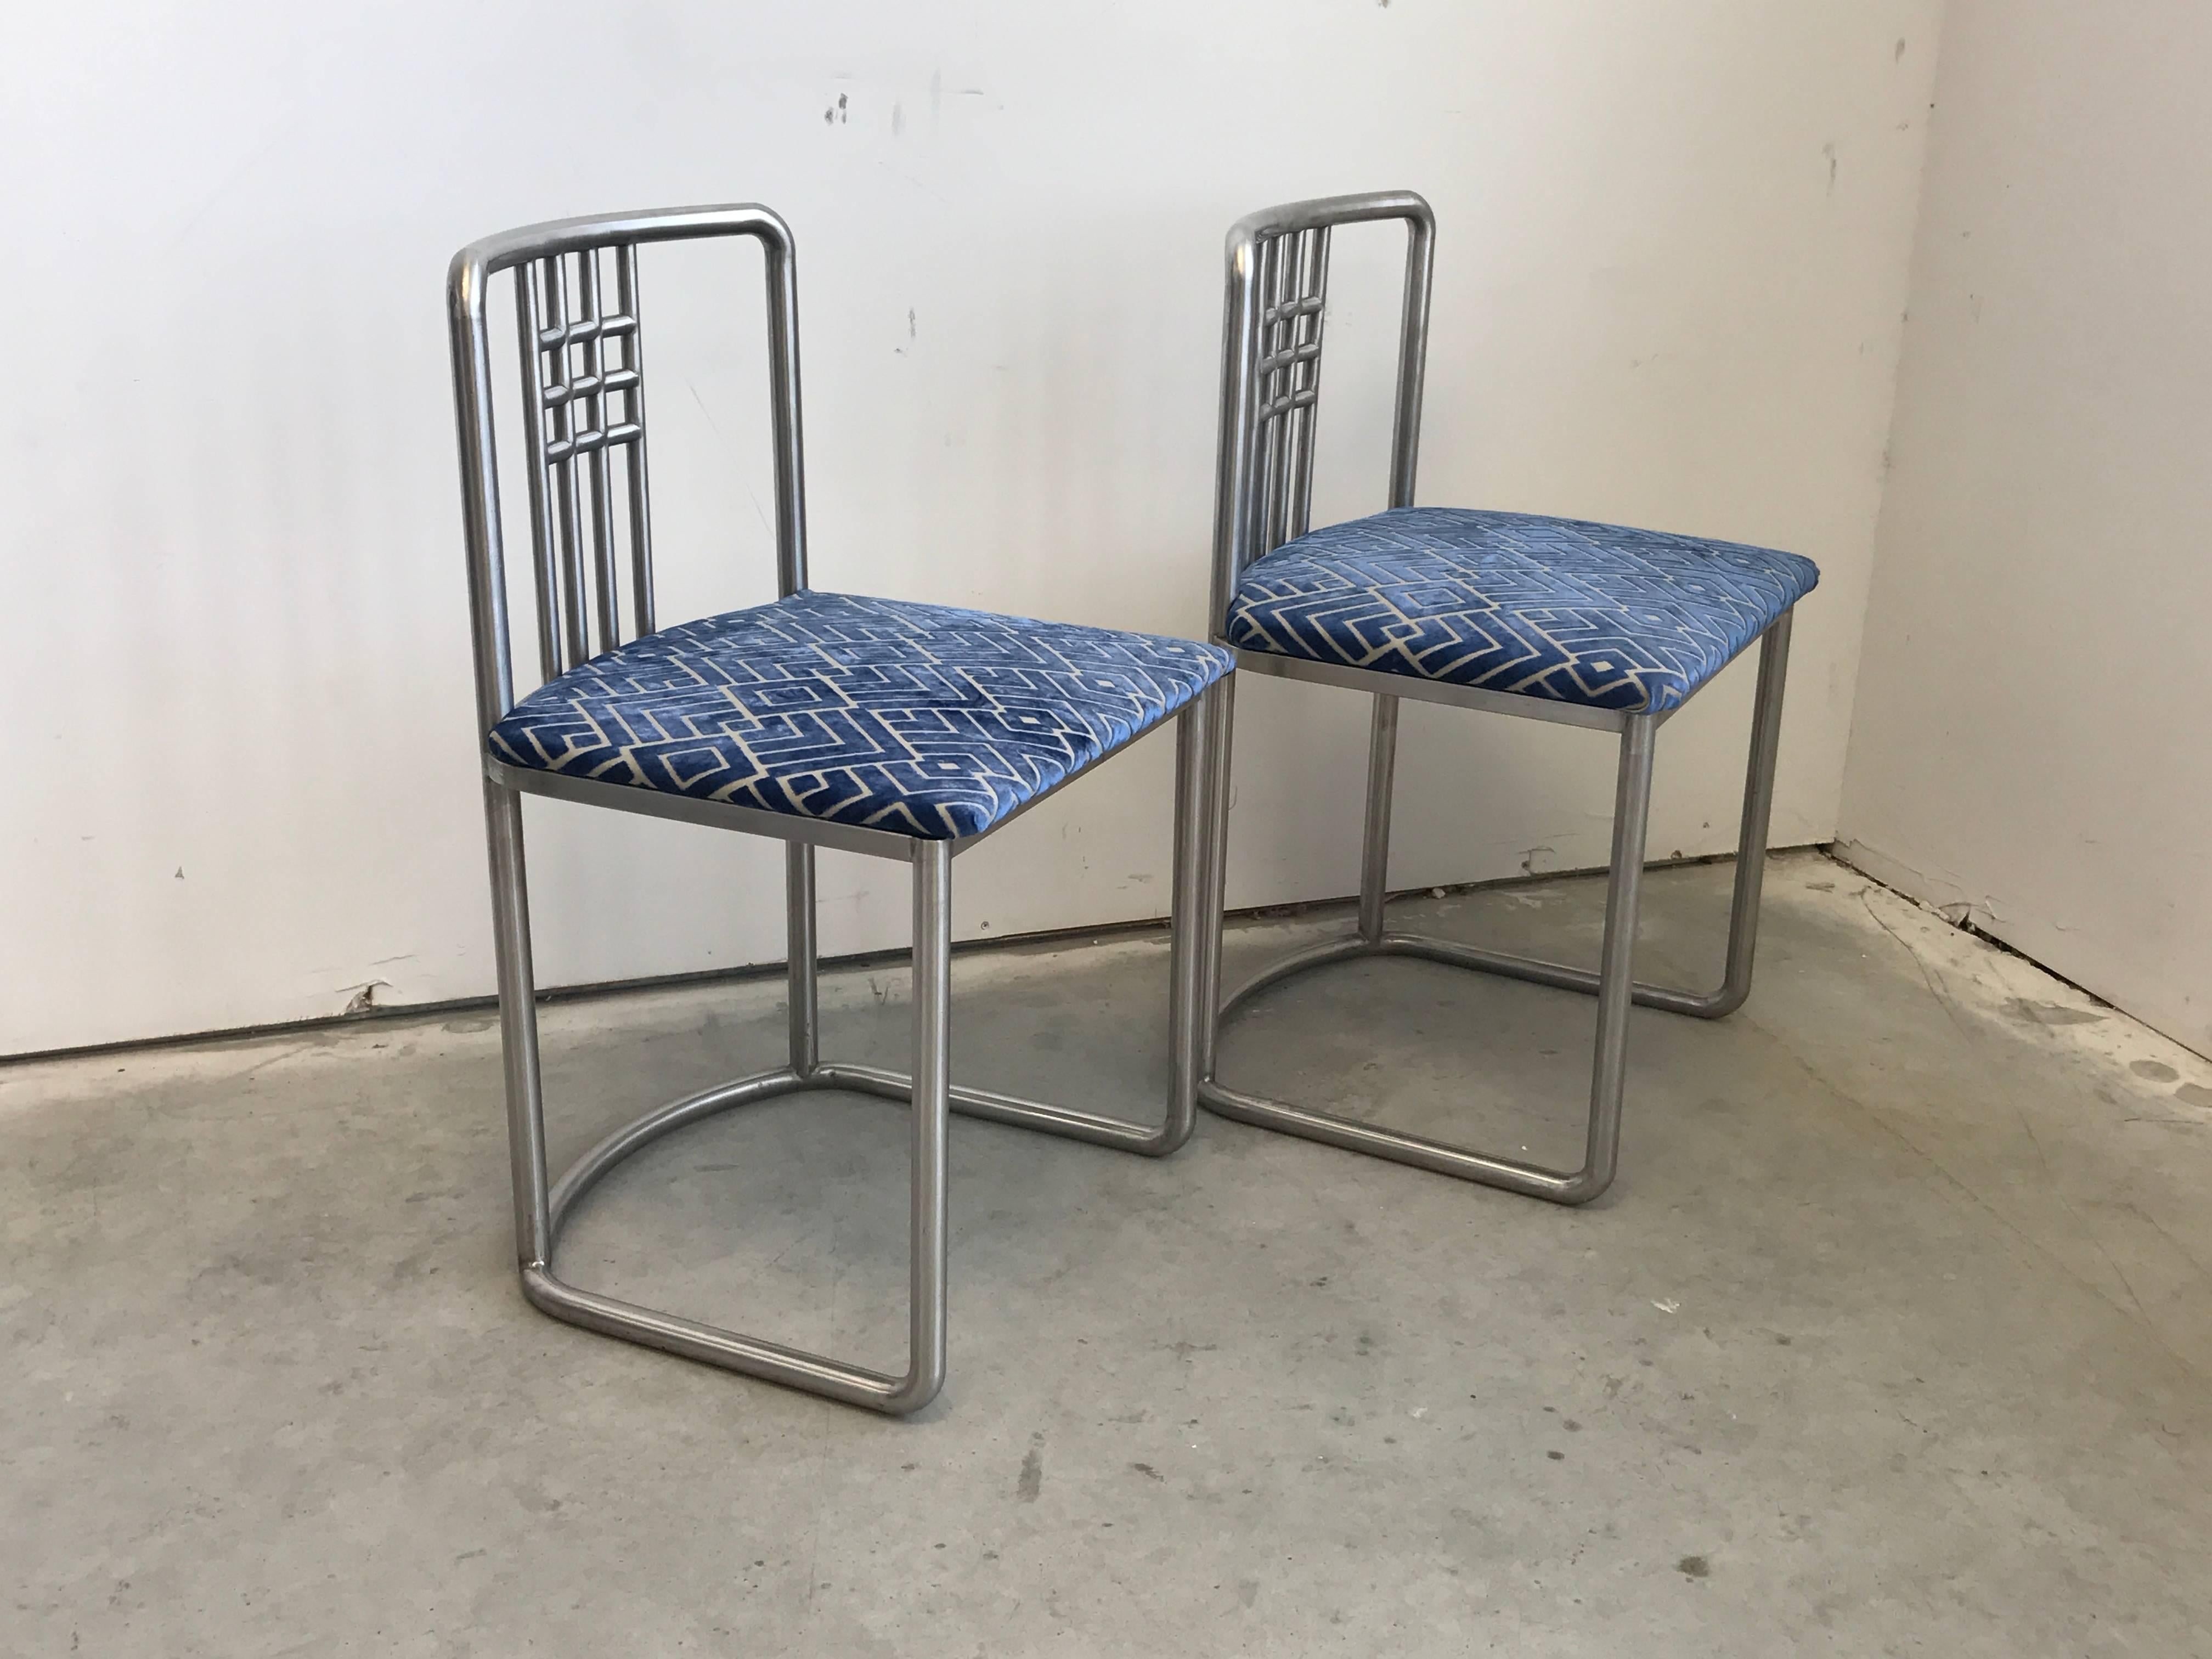 Offered is a stunning pair of 1970s, Frank Lloyd Wright styled, stainless steel side chairs with a modern, blue and grey cut velvet upholstery. One of a kind and sturdy.